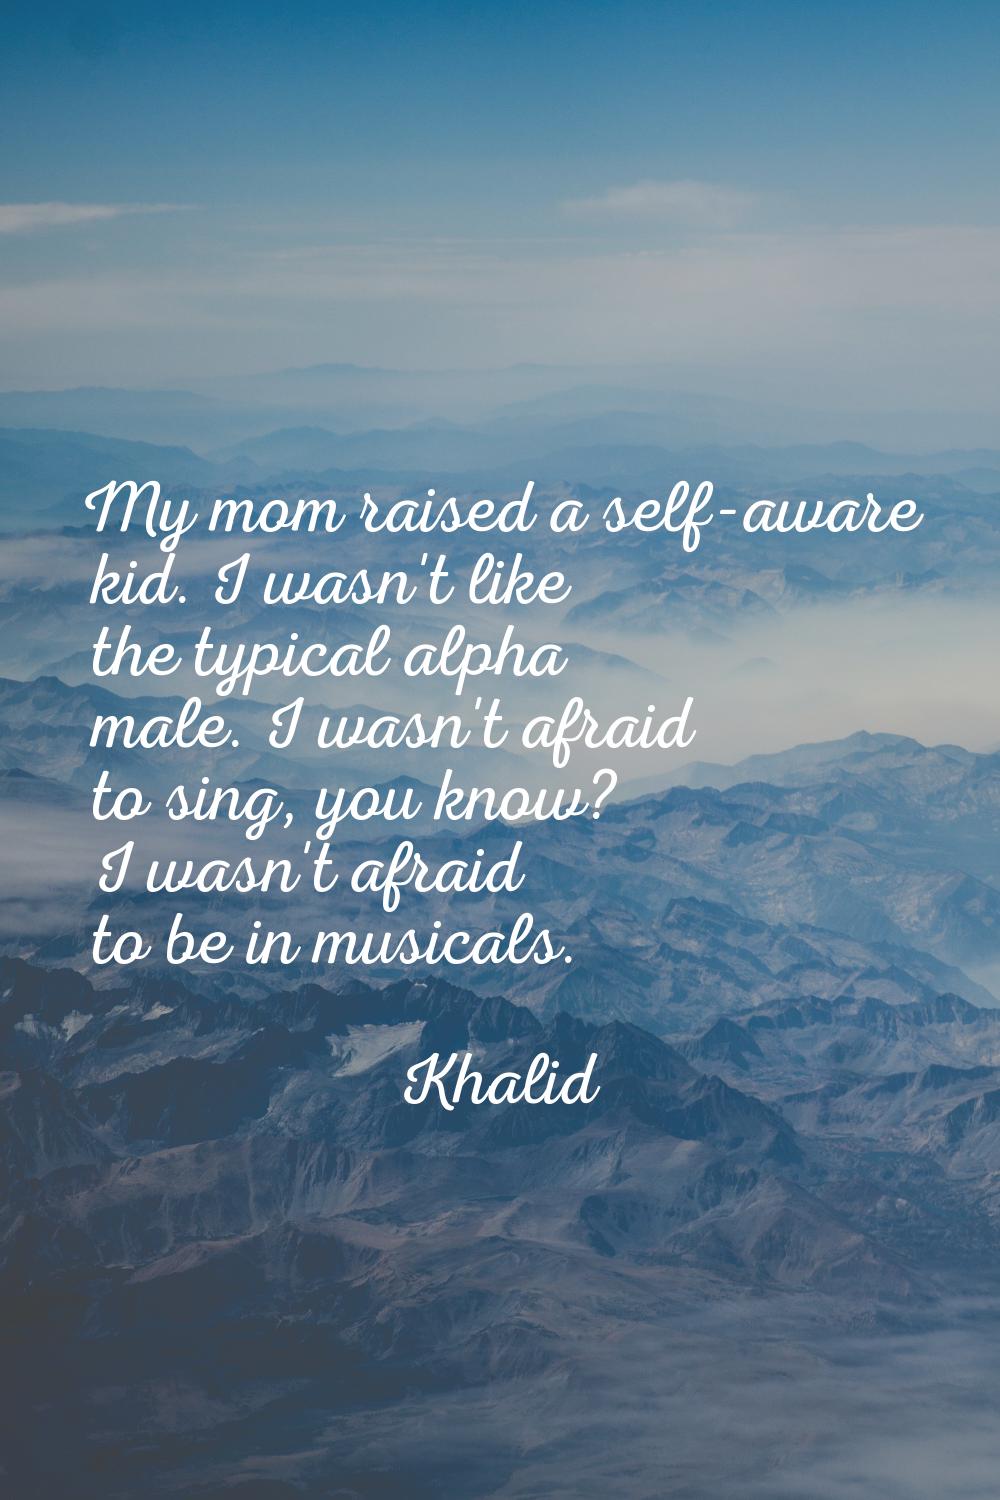 My mom raised a self-aware kid. I wasn't like the typical alpha male. I wasn't afraid to sing, you 